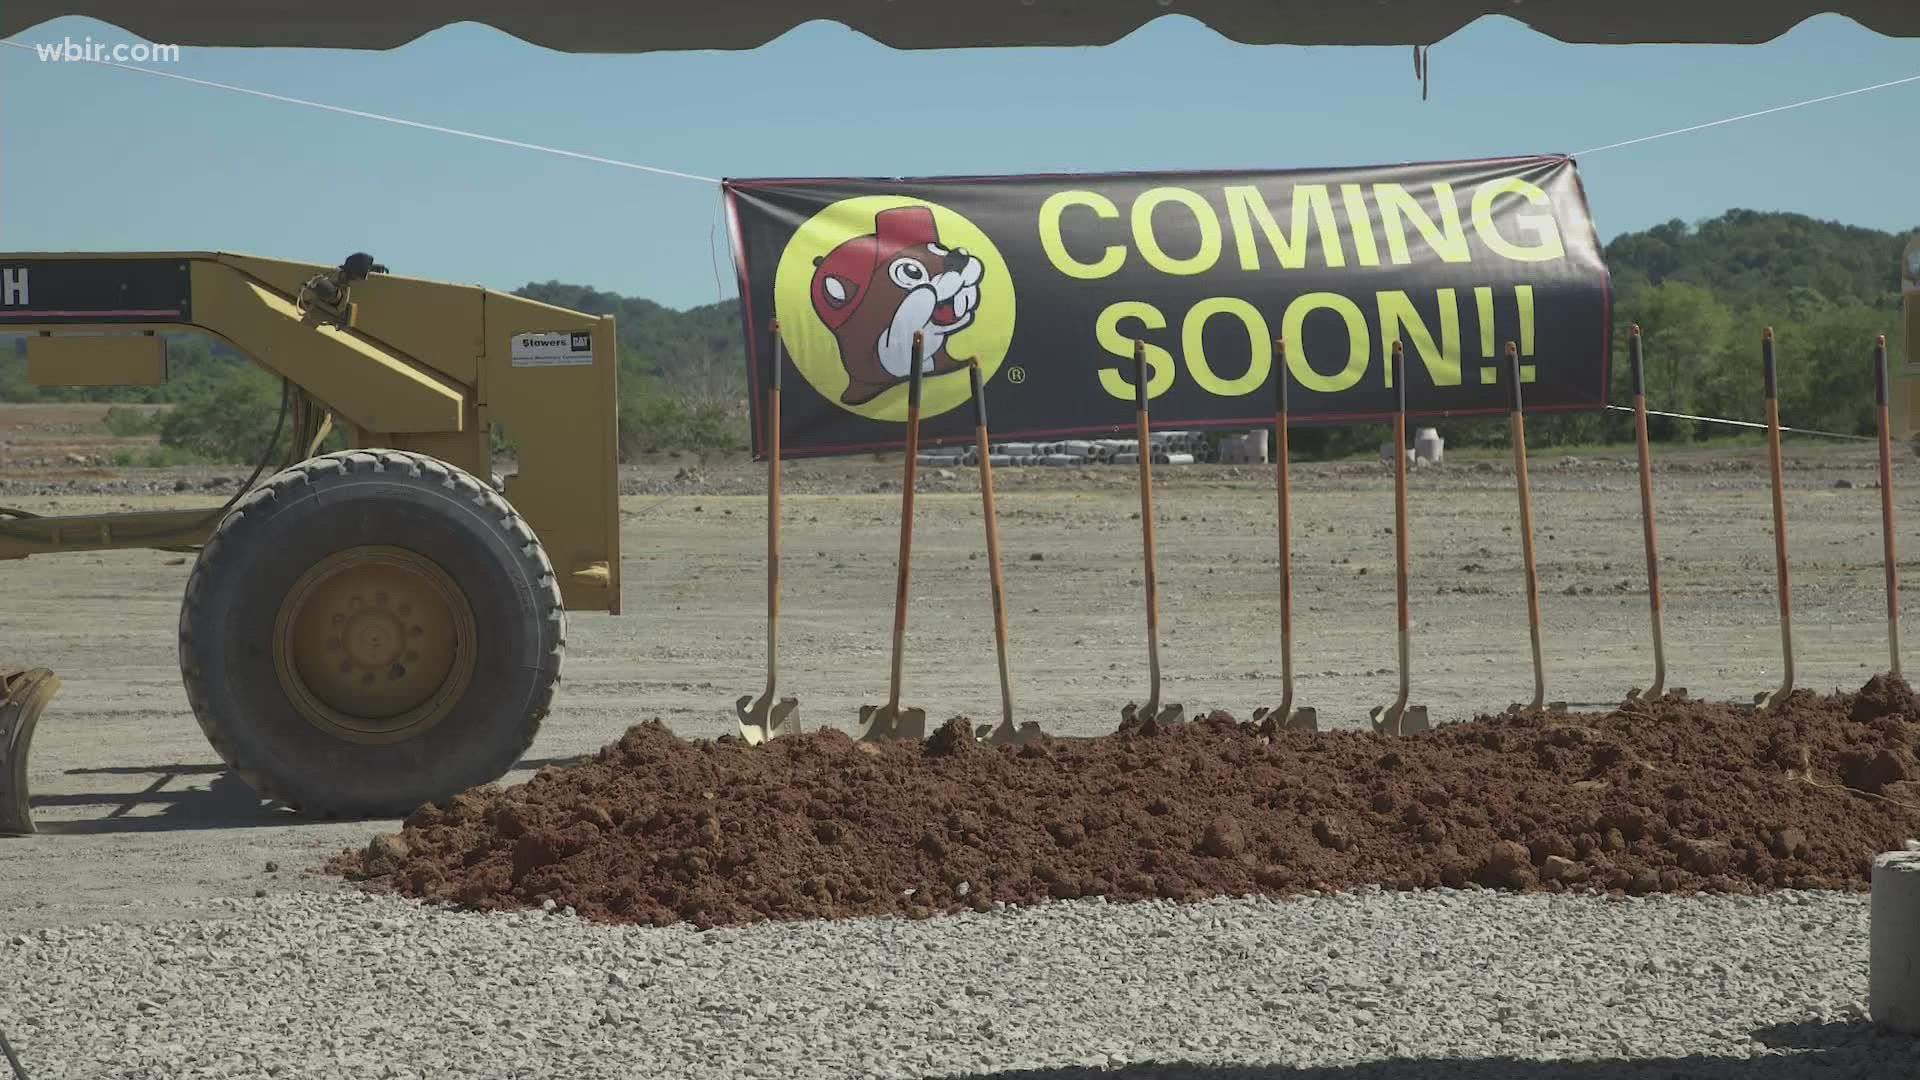 Buc-ee's is the first confirmed business to be part of the development.